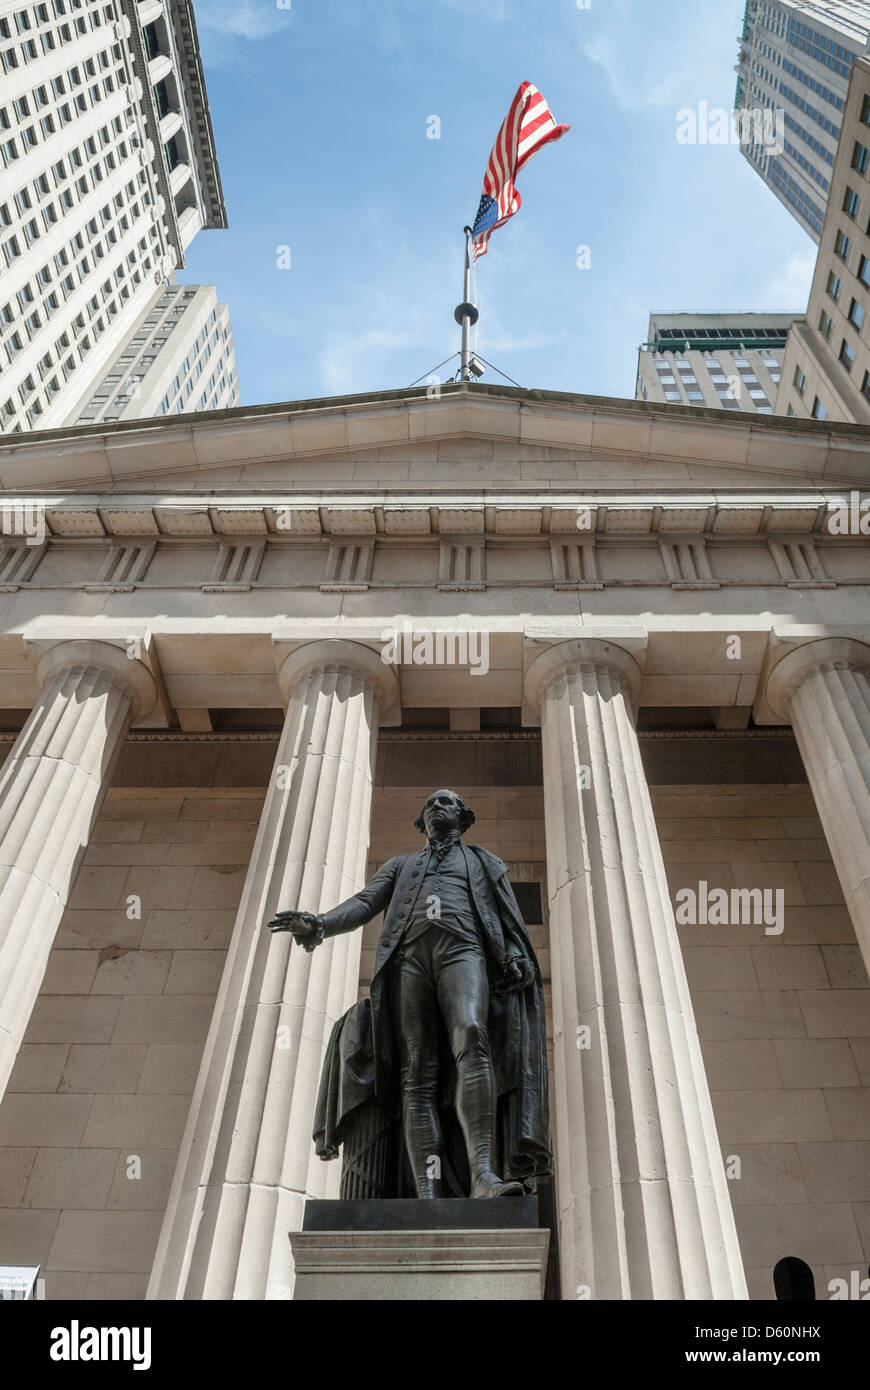 George Washington Monument in front of Federal Hall, Financial District, New York City, USA - Image taken from public ground Stock Photo